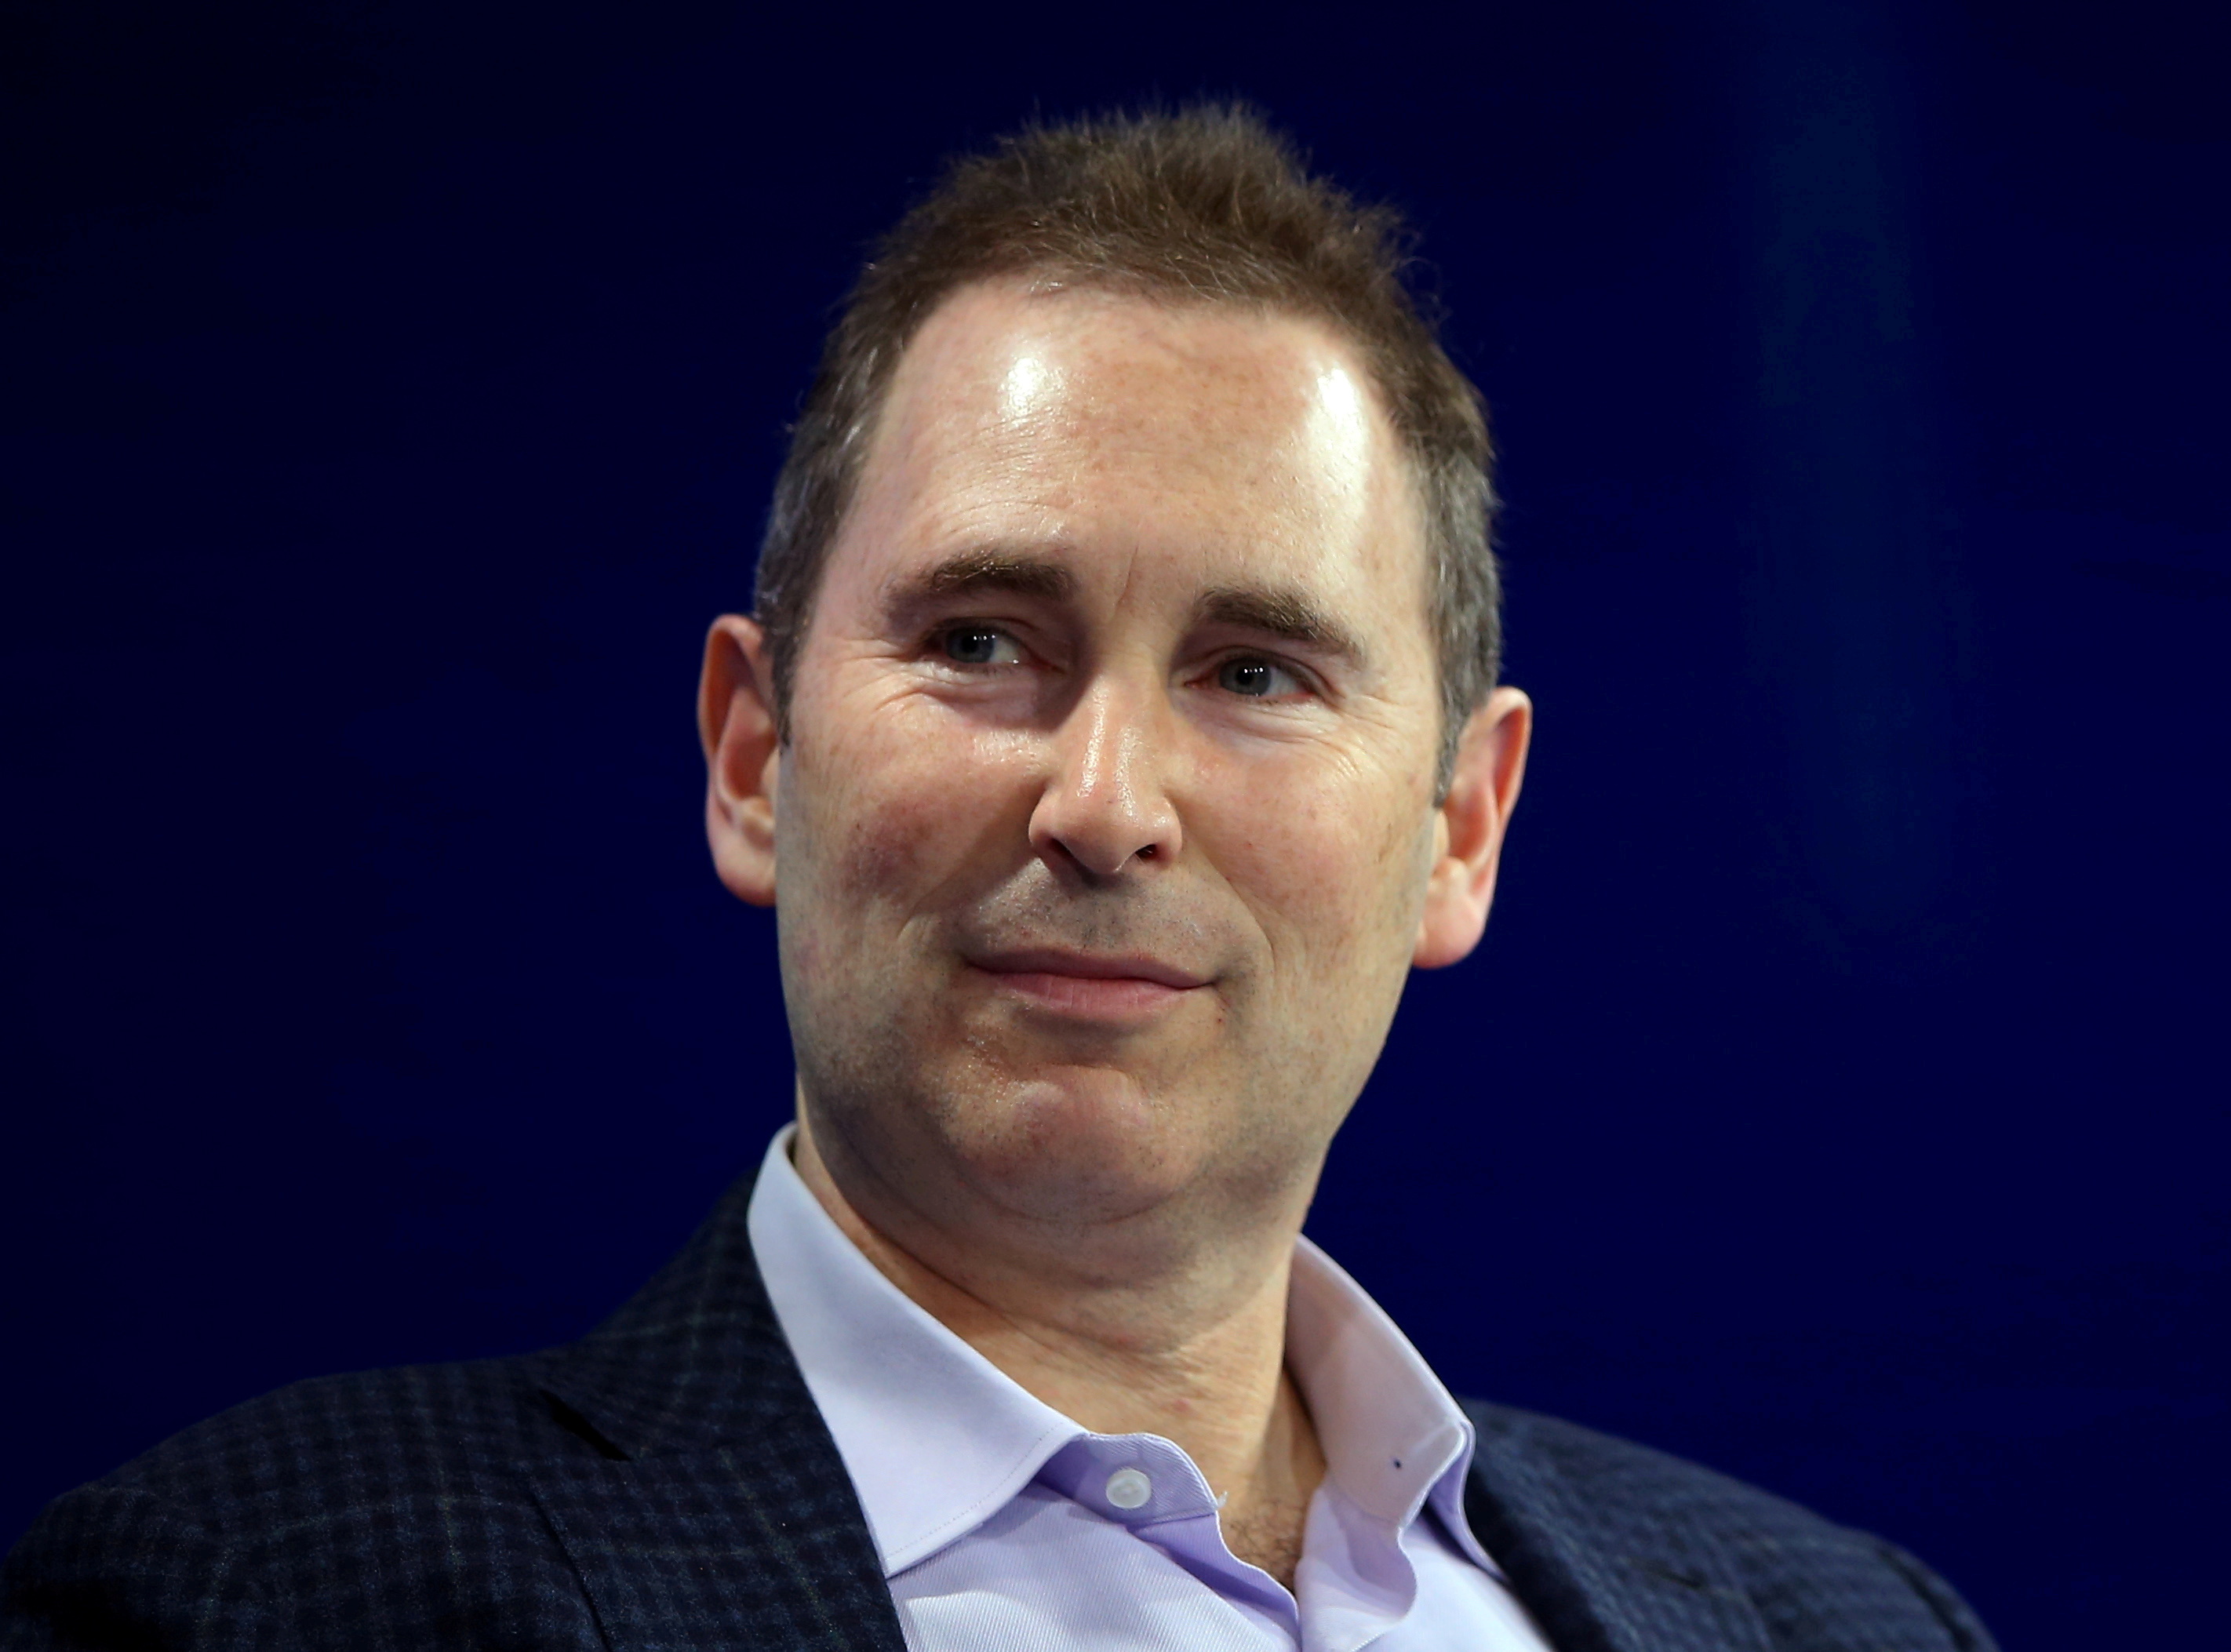 Amazon's Andy Jassy speaks at the WSJD Live conference in Laguna Beach